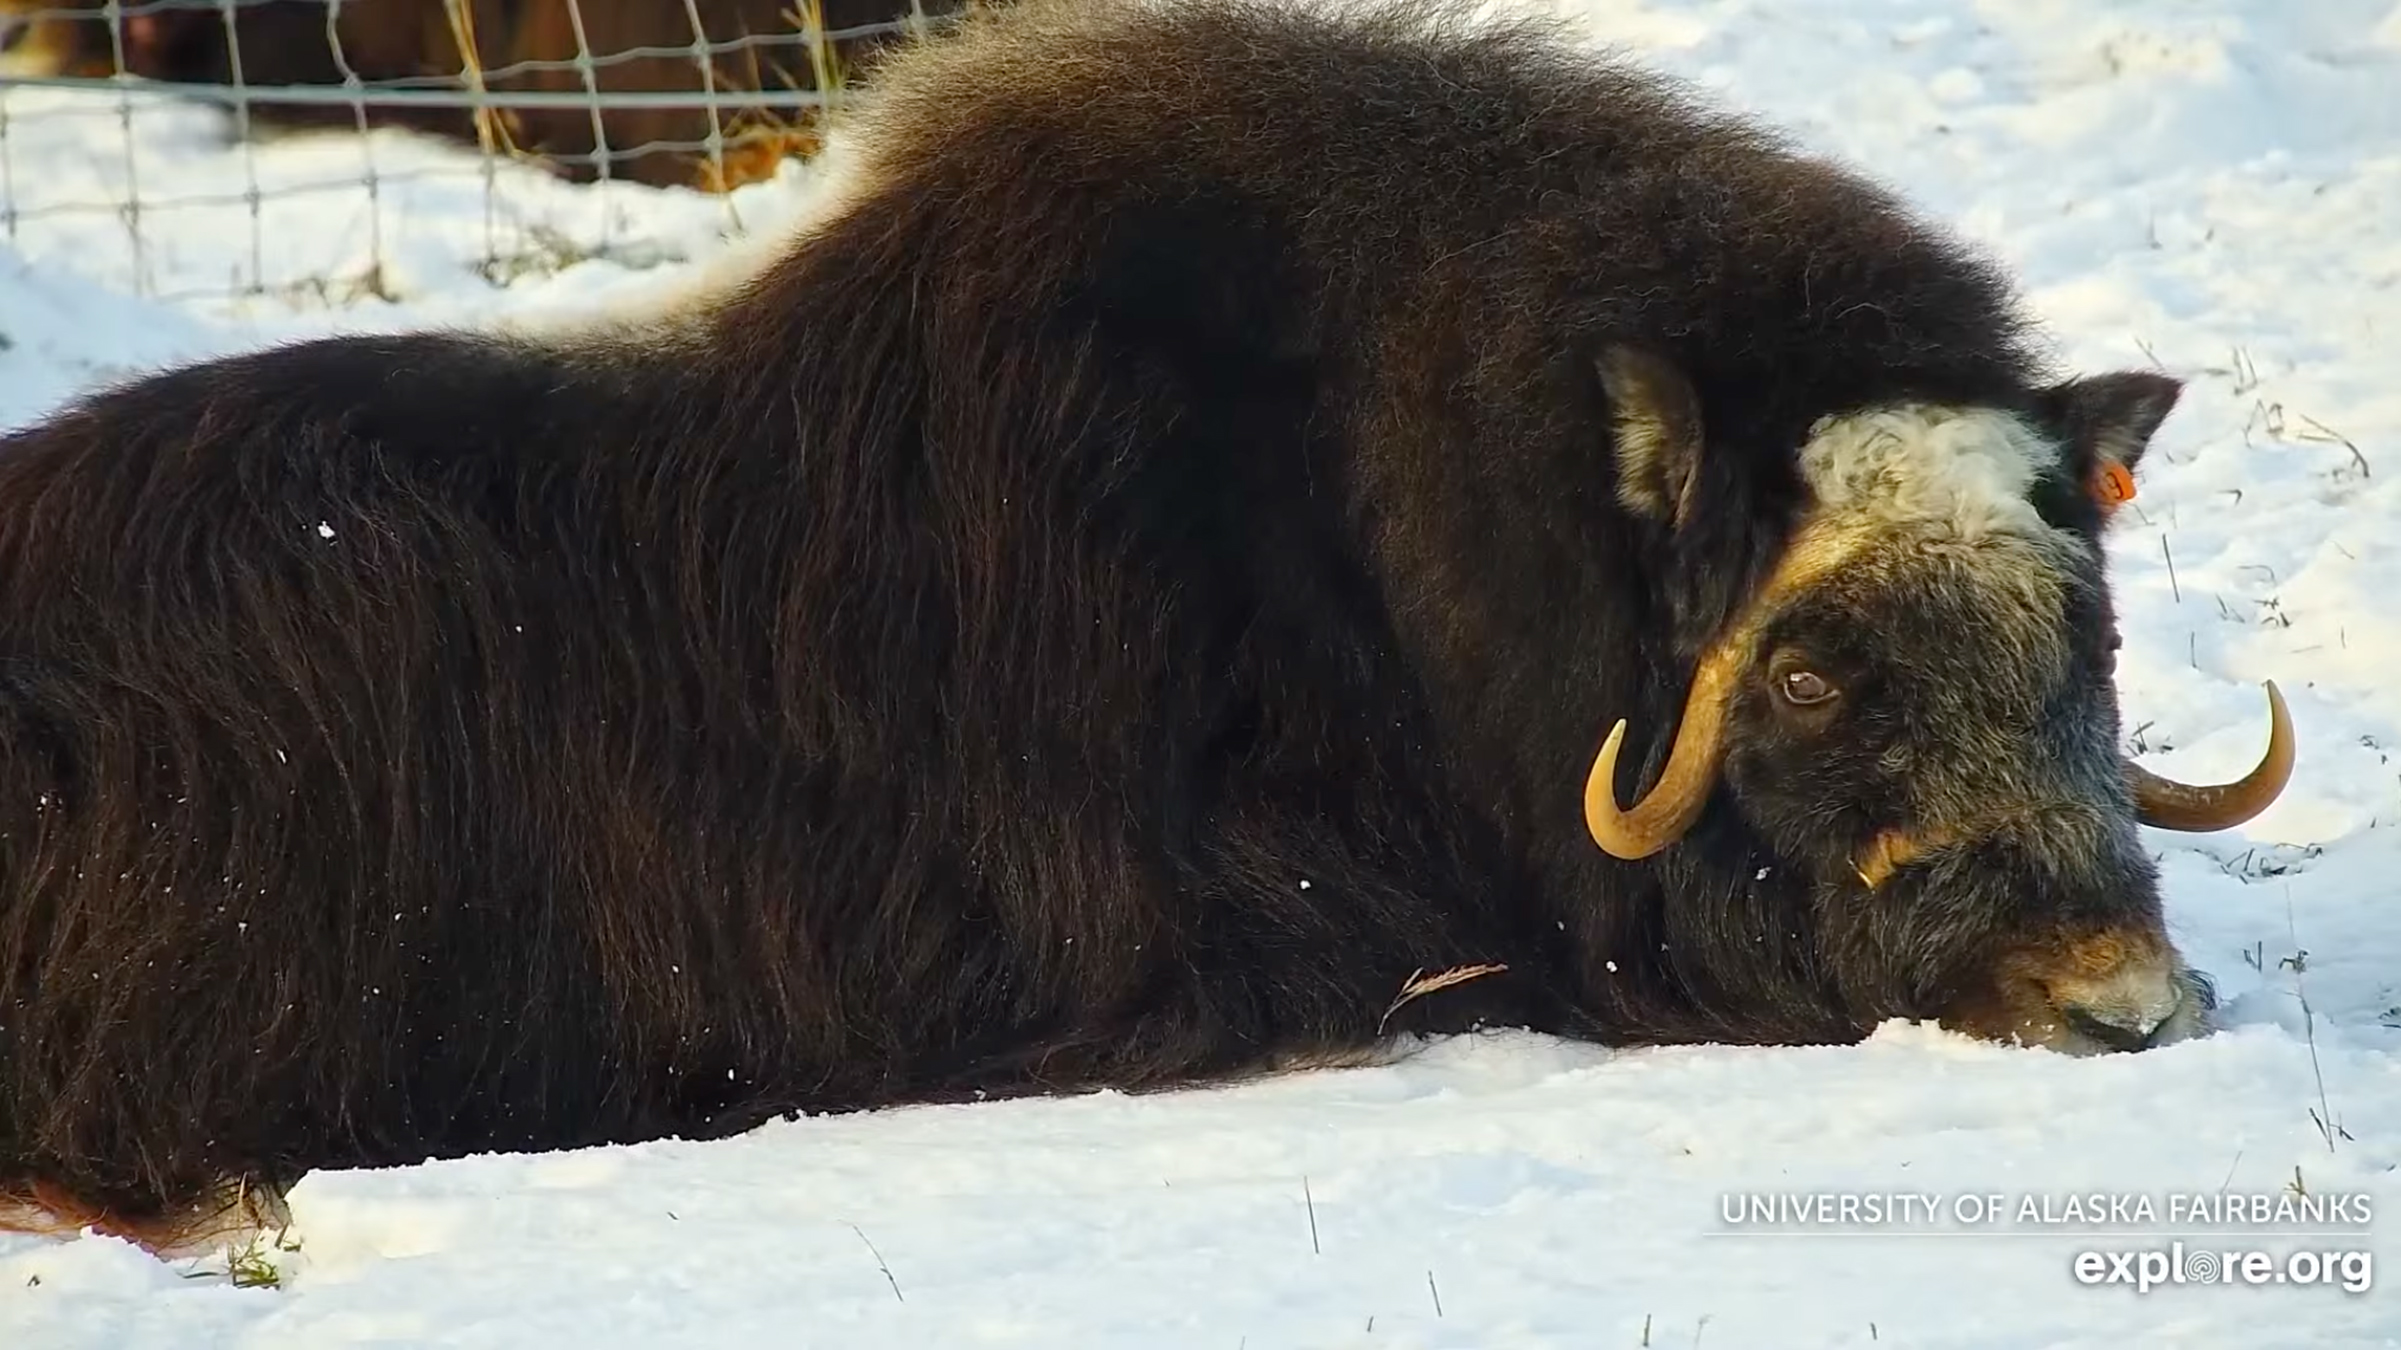 A screenshoot of muskox lying down in the snow, looking at the camera.